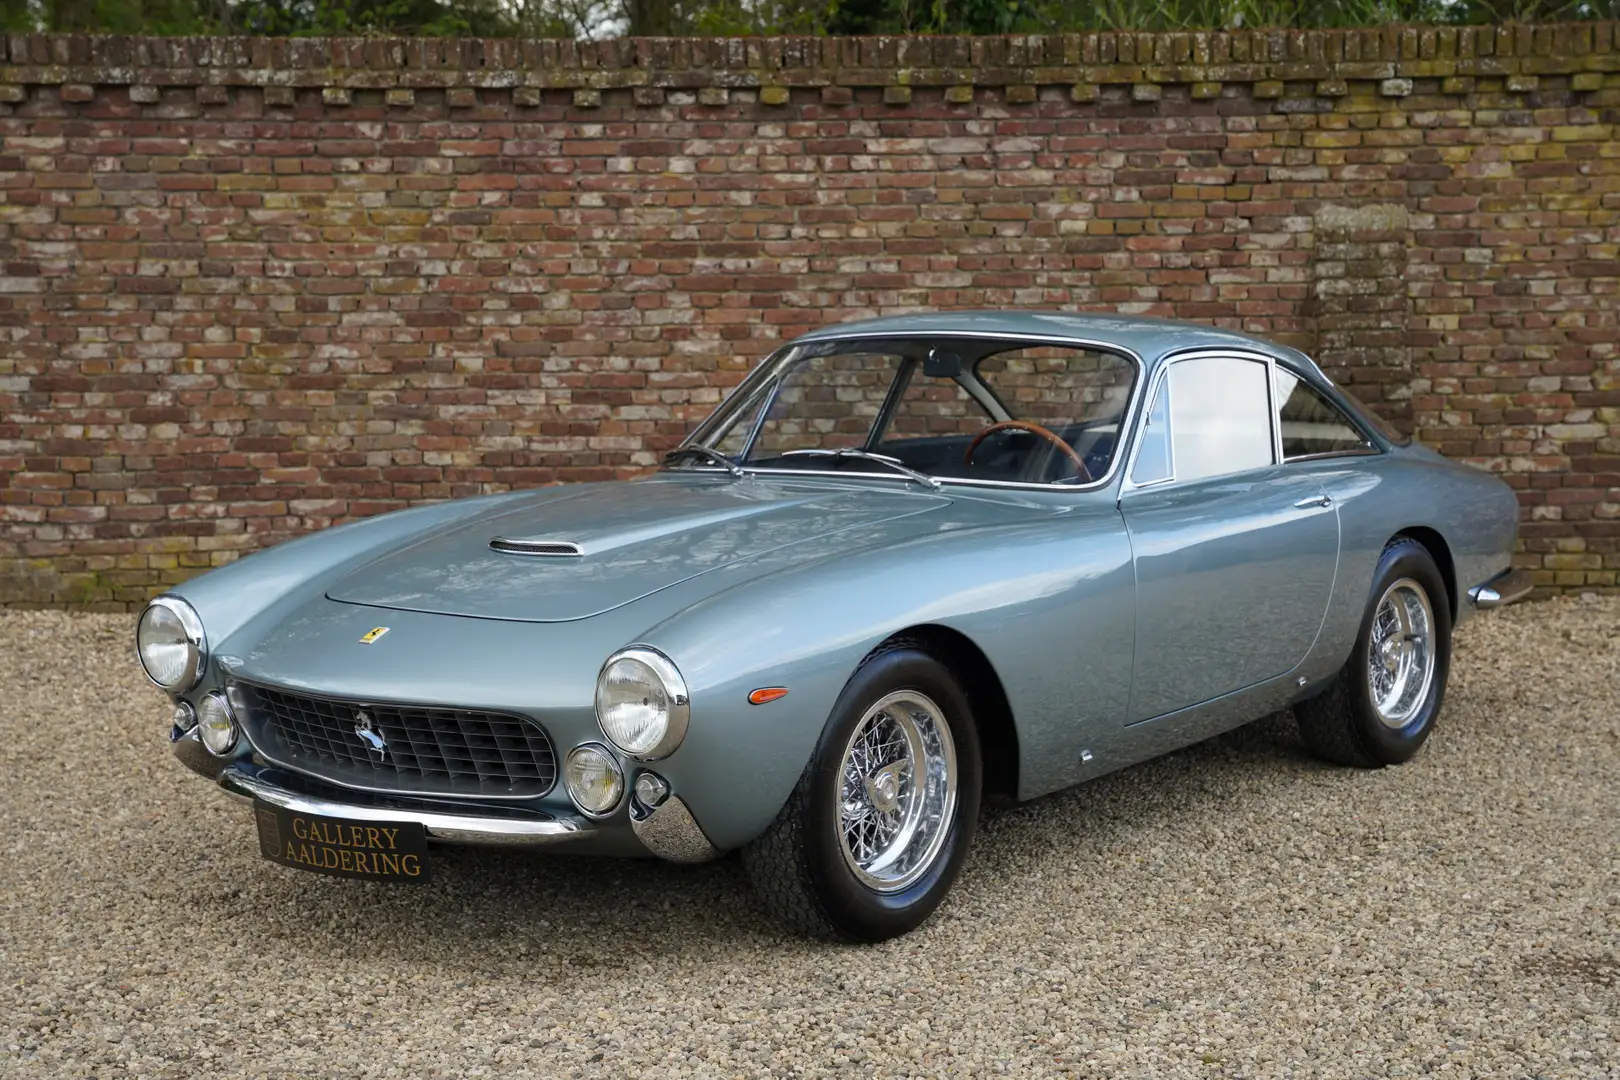 Ferrari 250 GT Lusso Excellent condition throughout, "Red Book Azul - 1